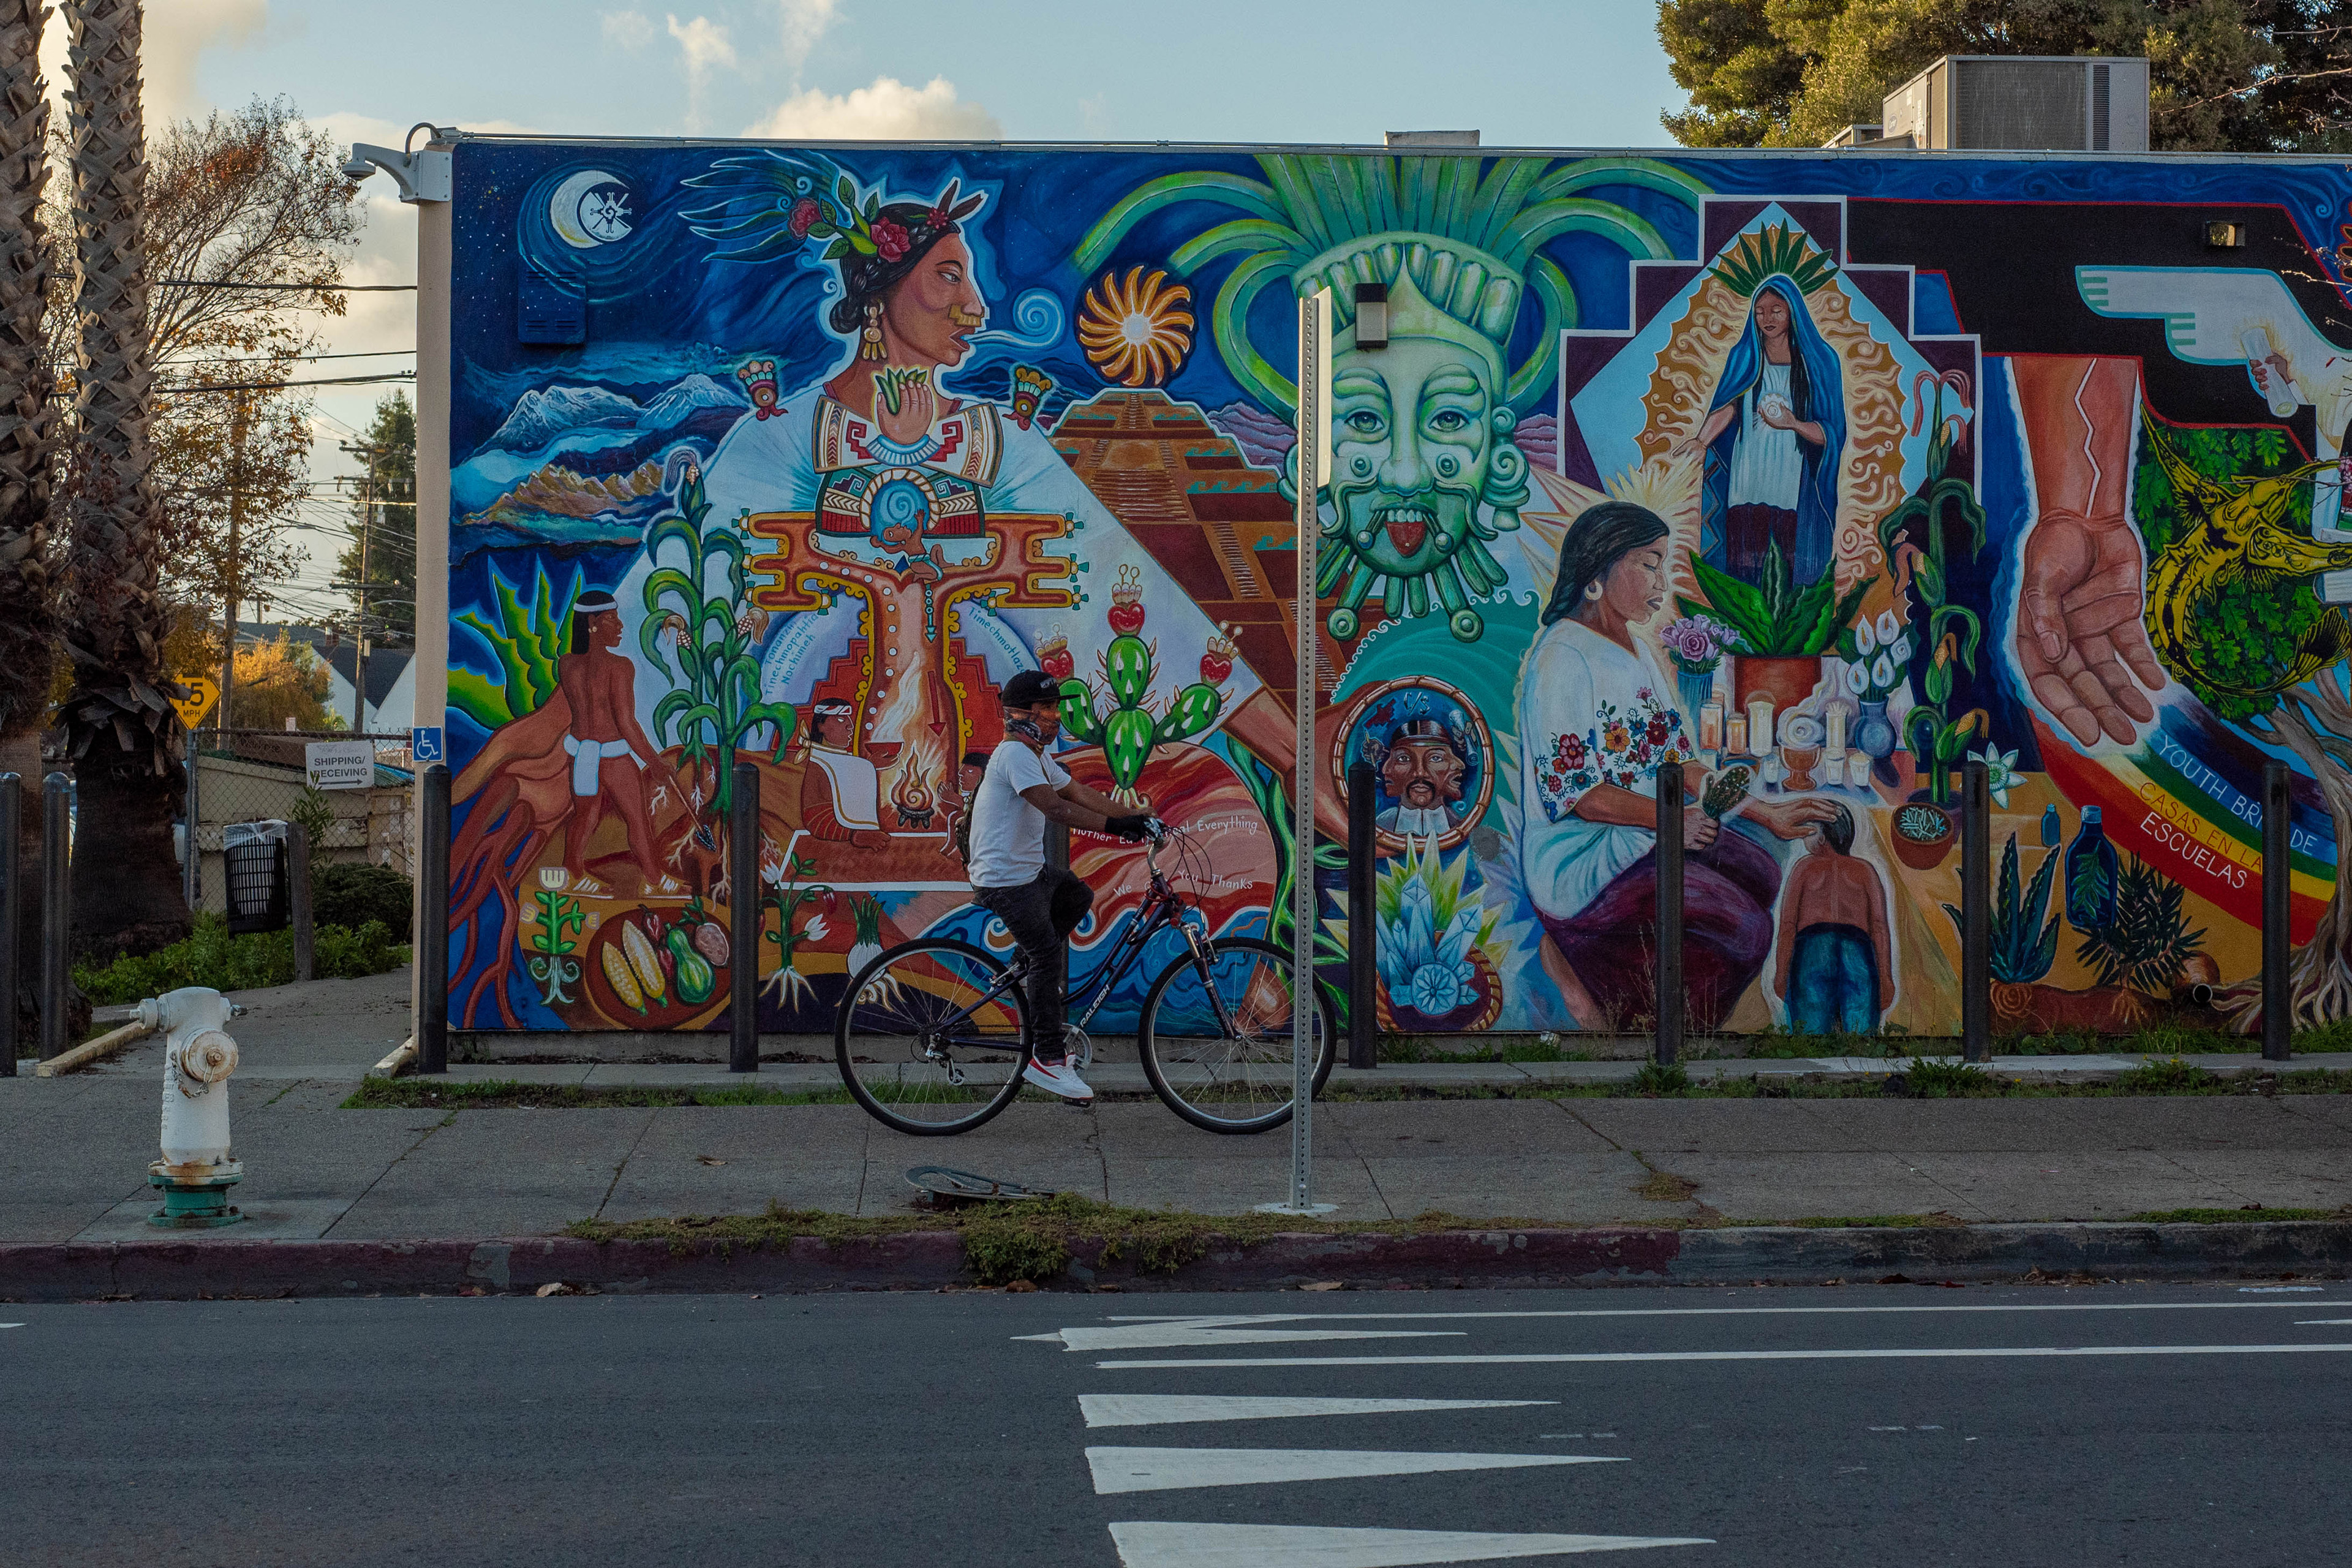 A photograph of a large, colorful mural on the side of a building.